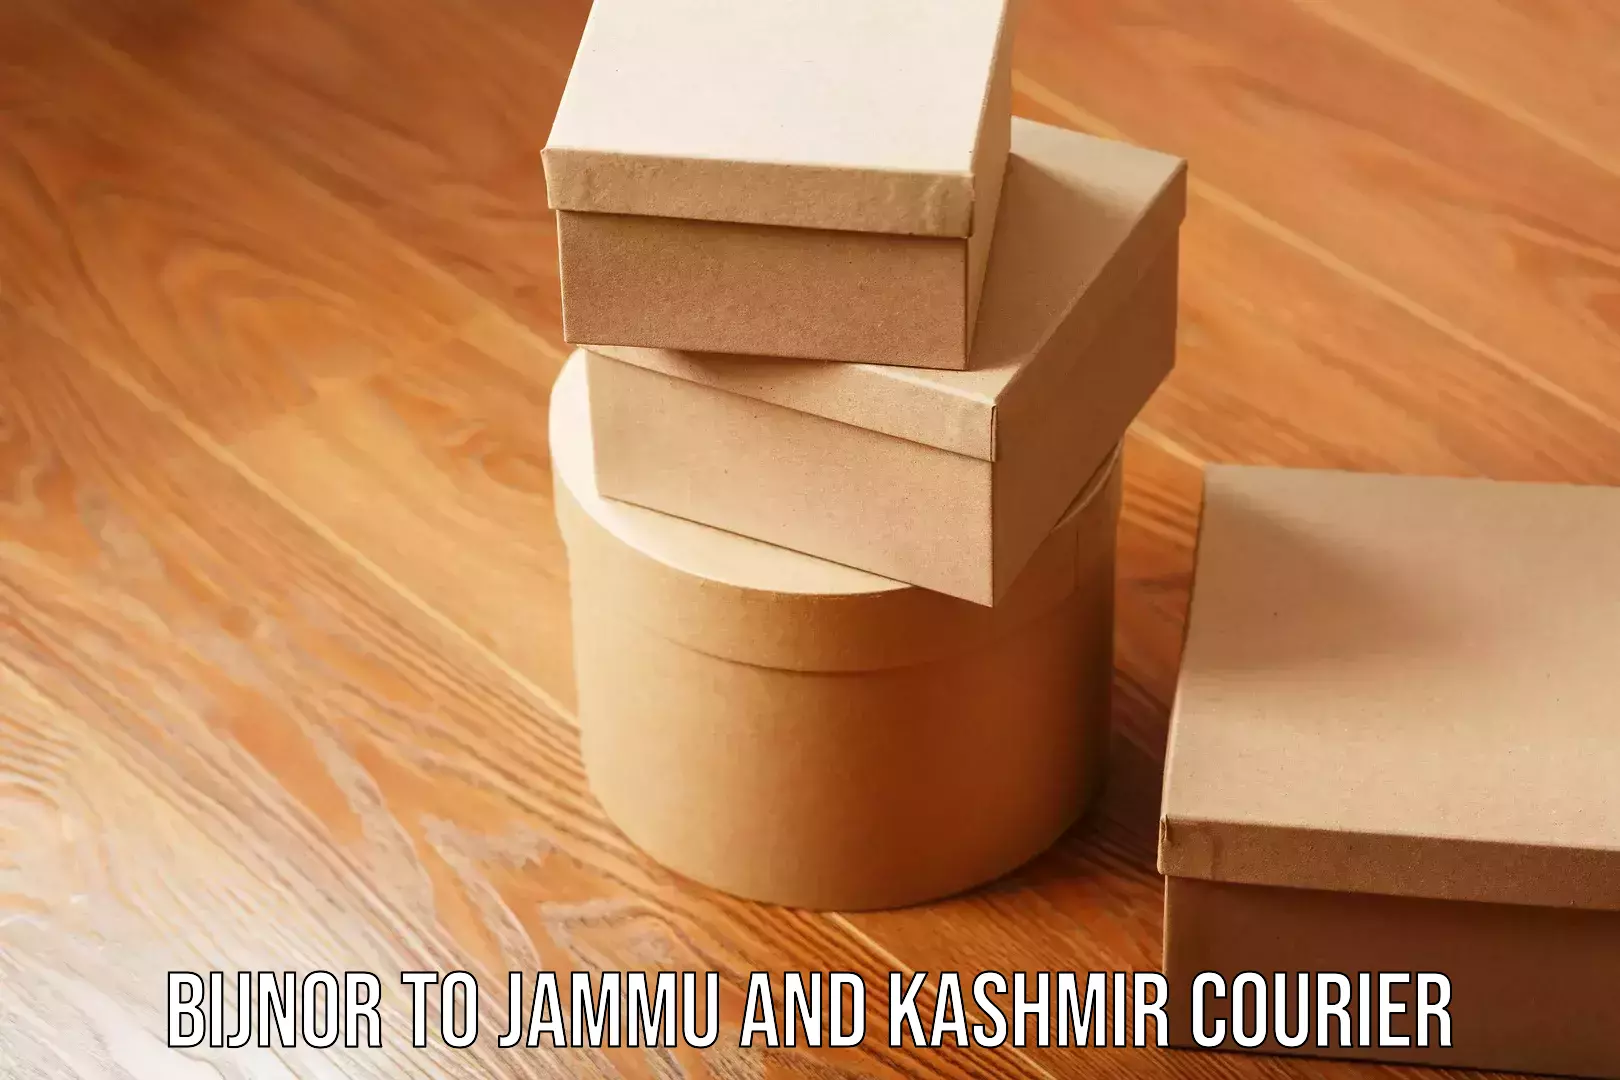 Flexible delivery scheduling Bijnor to Jammu and Kashmir